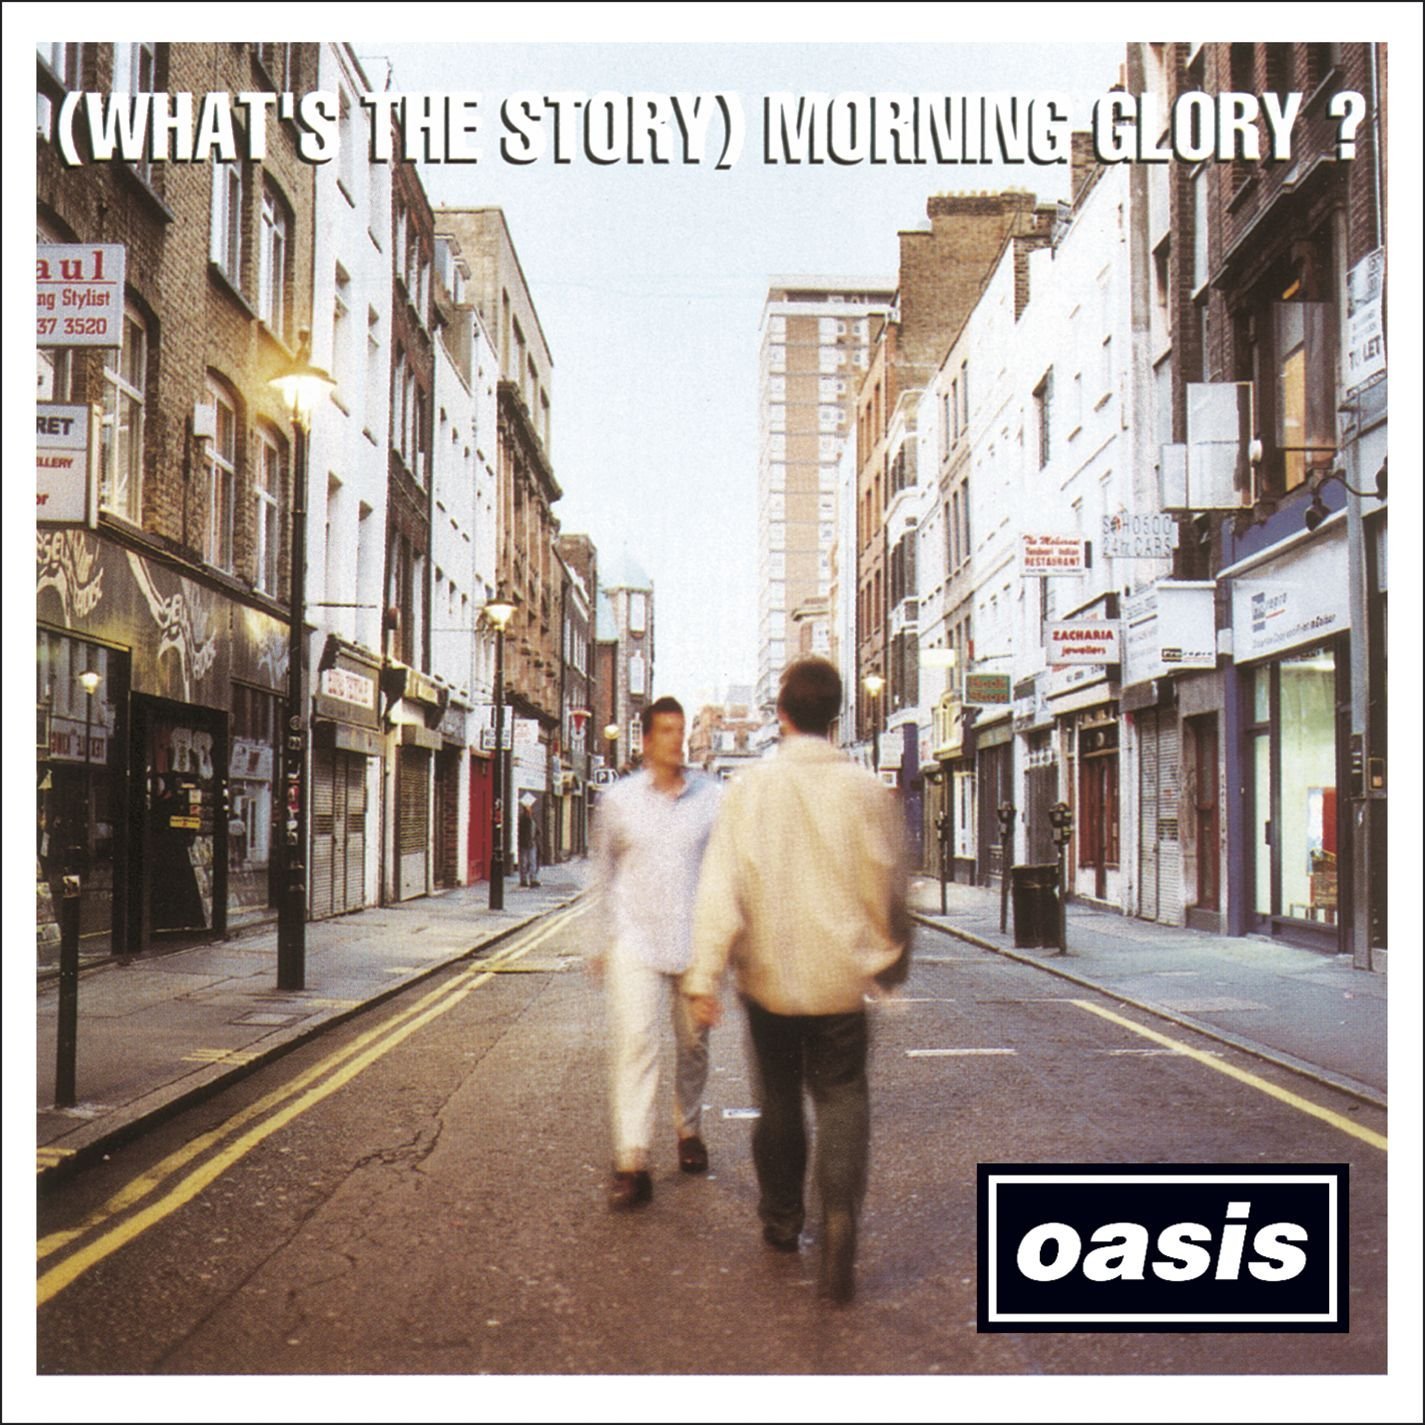 OASIS WHATS THE STORY